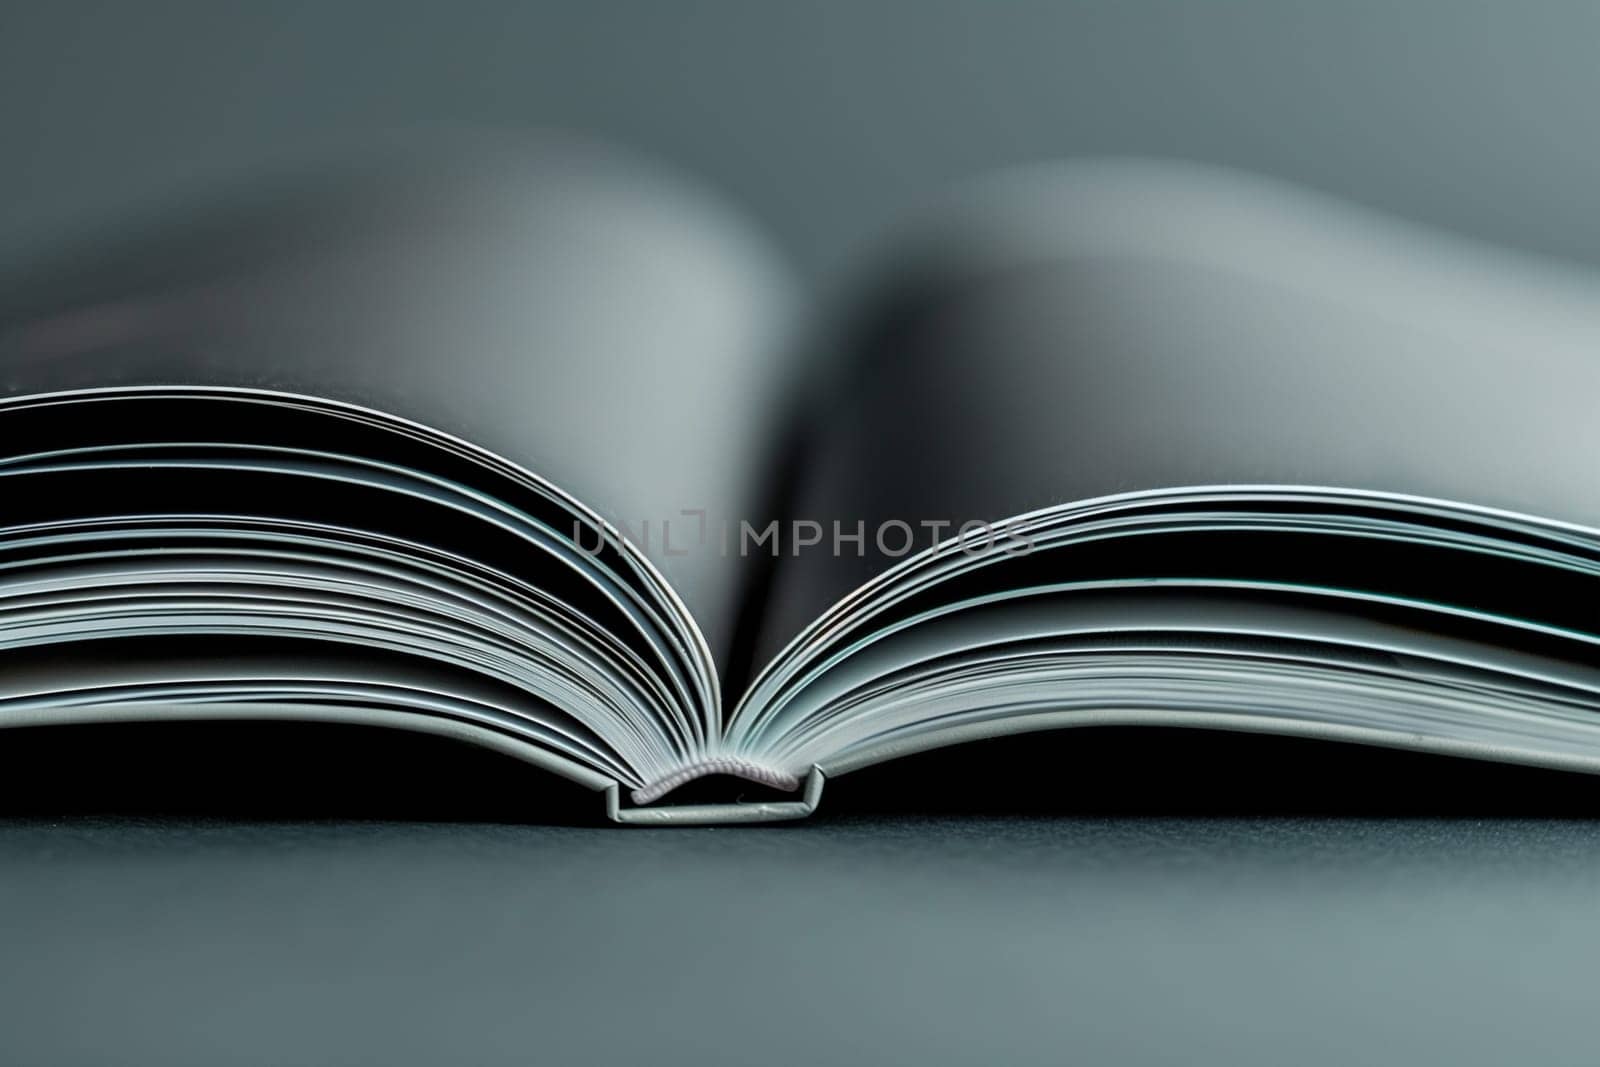 An open book resting on a plain grey background, showcasing its pages and cover.